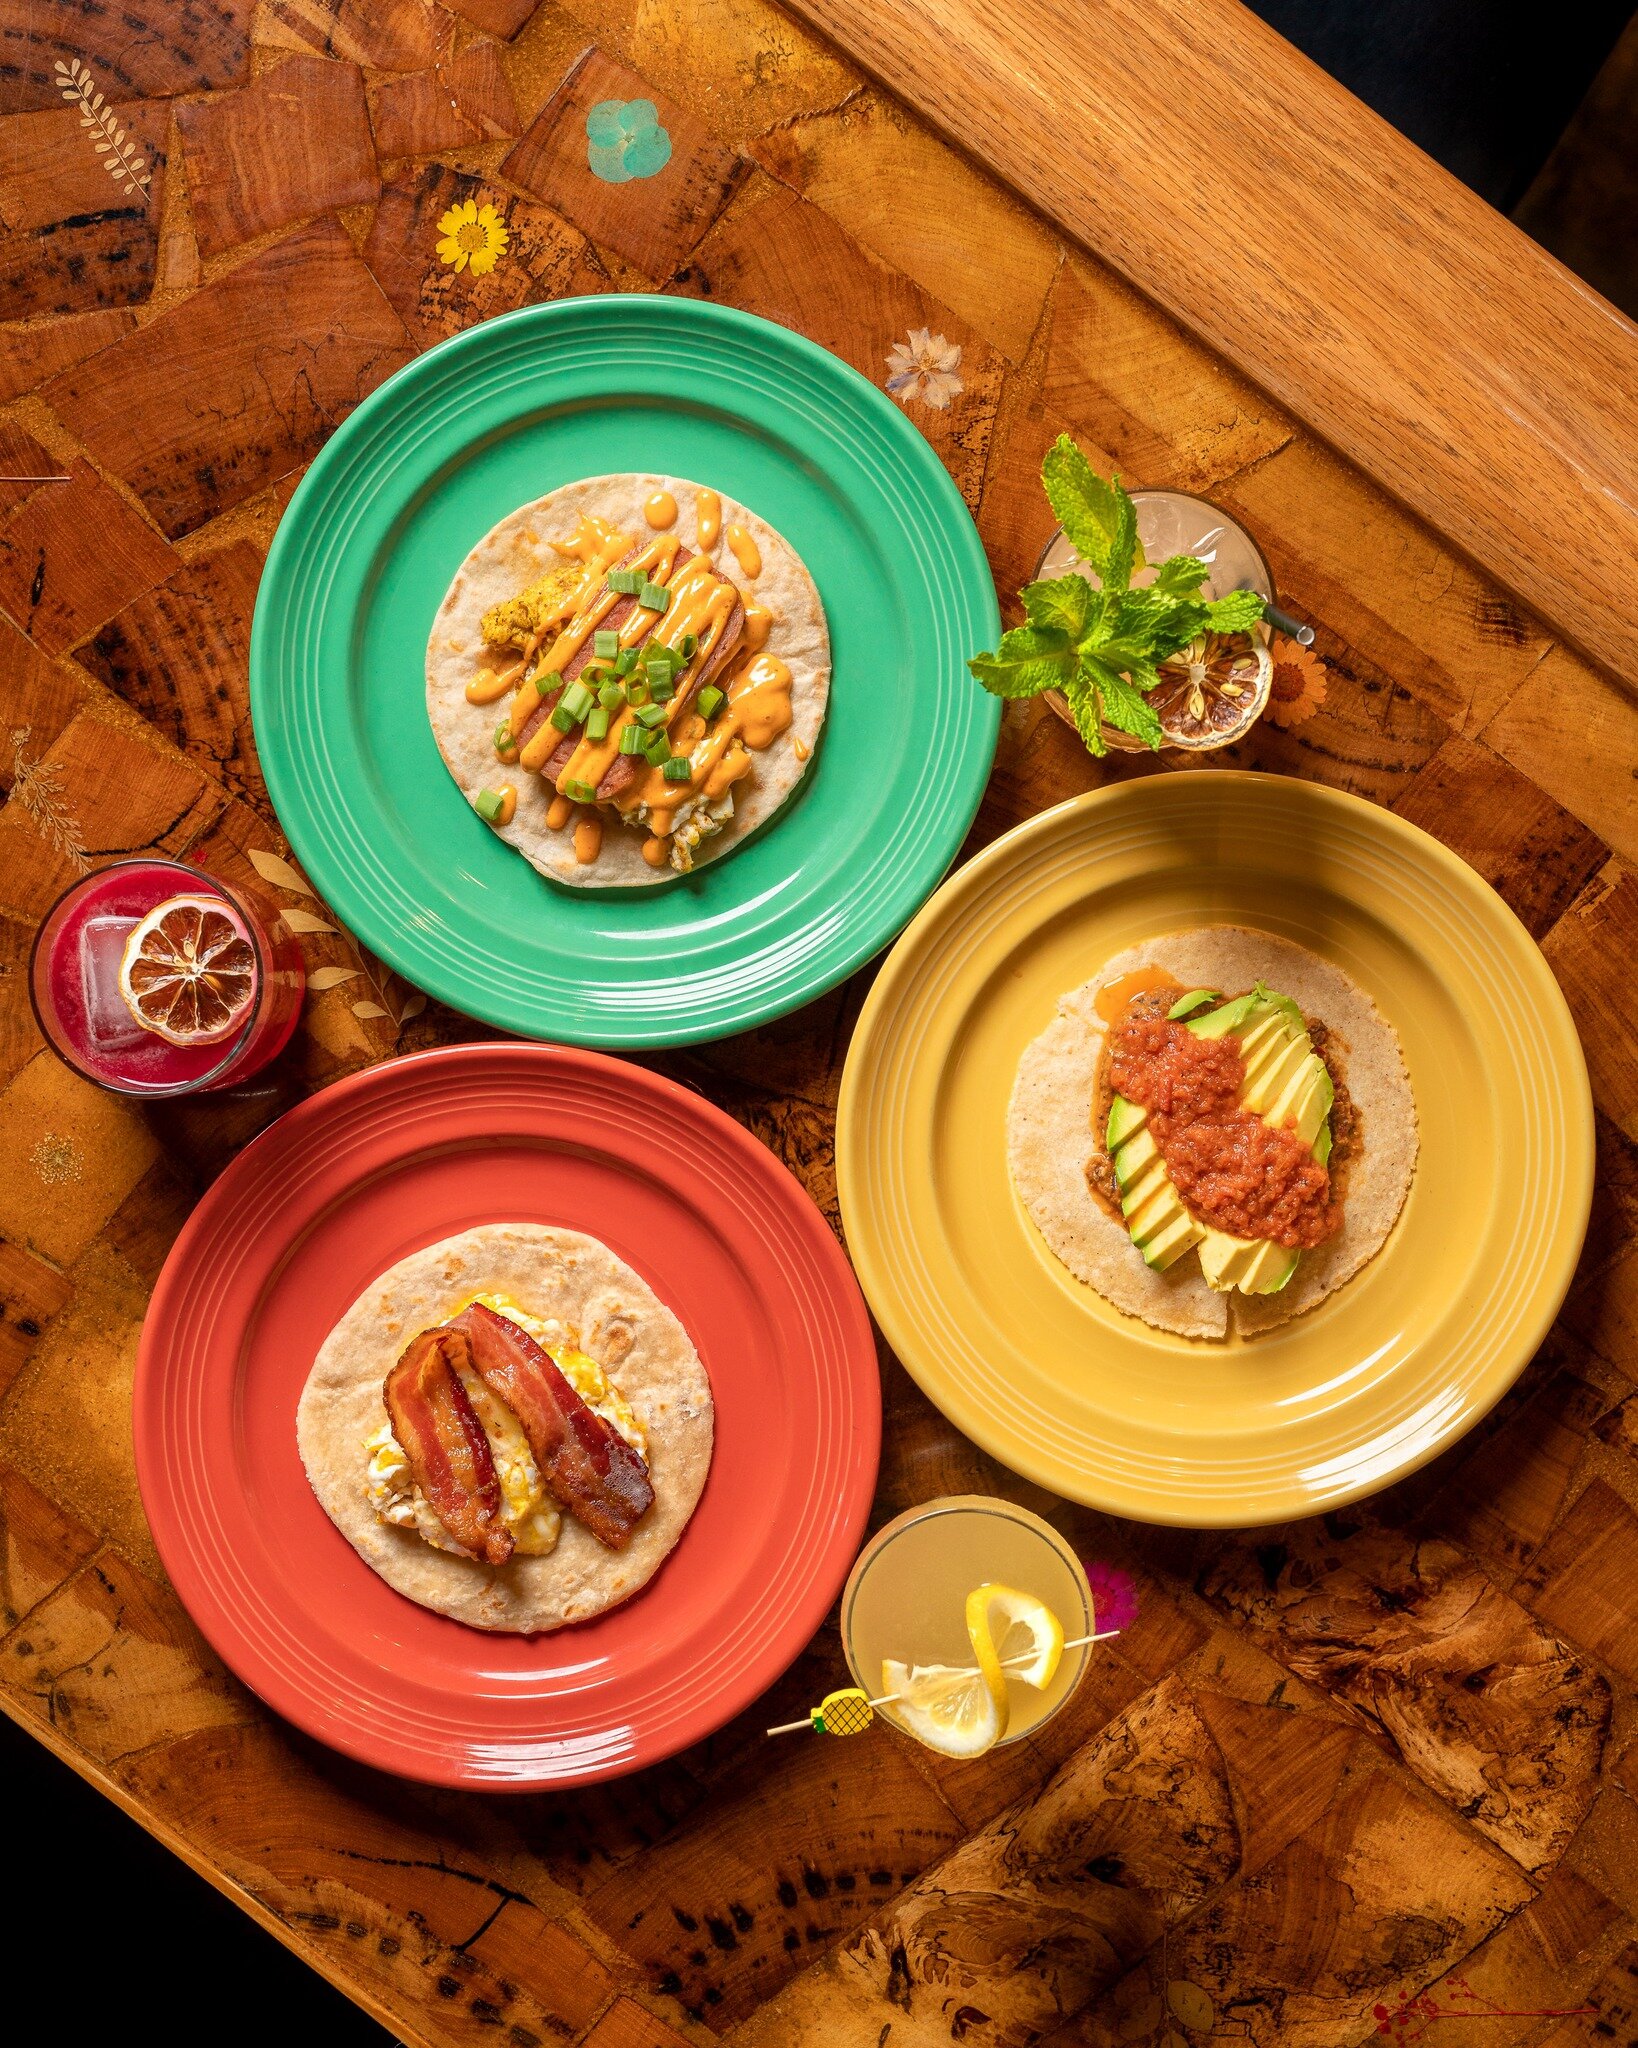 What&rsquo;s better than tacos? Breakfast tacos! Join us this weekend for Sunday Brunch, we have 5 delicious breakfast tacos to choose from!

Sunday Hours of Operation:
Brunch, 11am-3pm
Dinner, 5pm-10pm